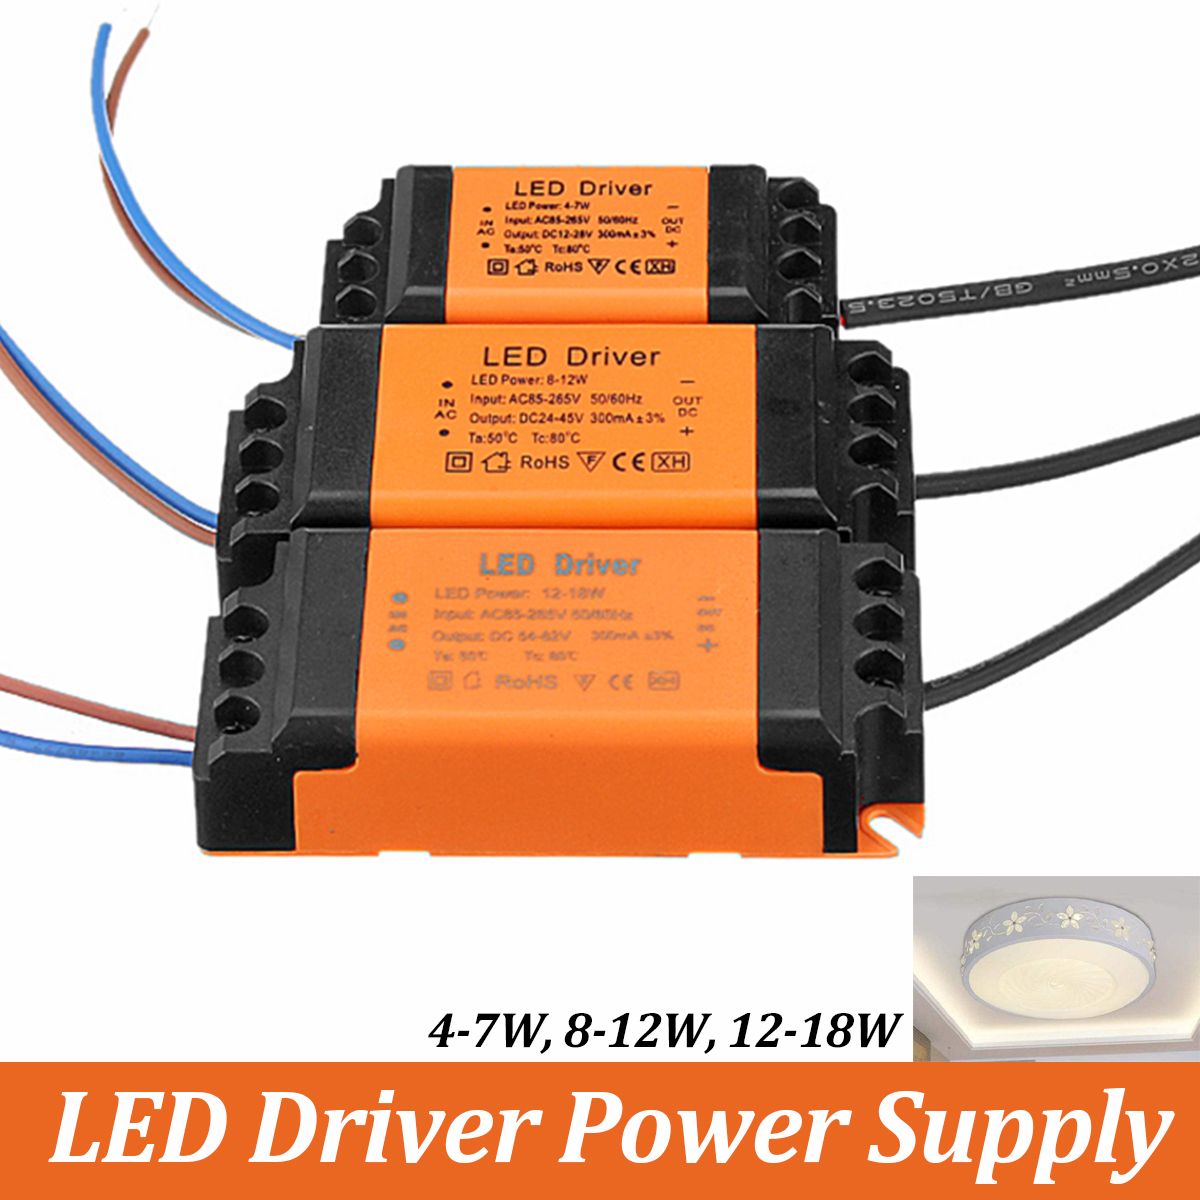 AC85-265V-To-DC12-82V-4-18W-Power-Supply-LED-Driver-Constant-Current-for-Floodlight-Ceiling-Lamp-1367454